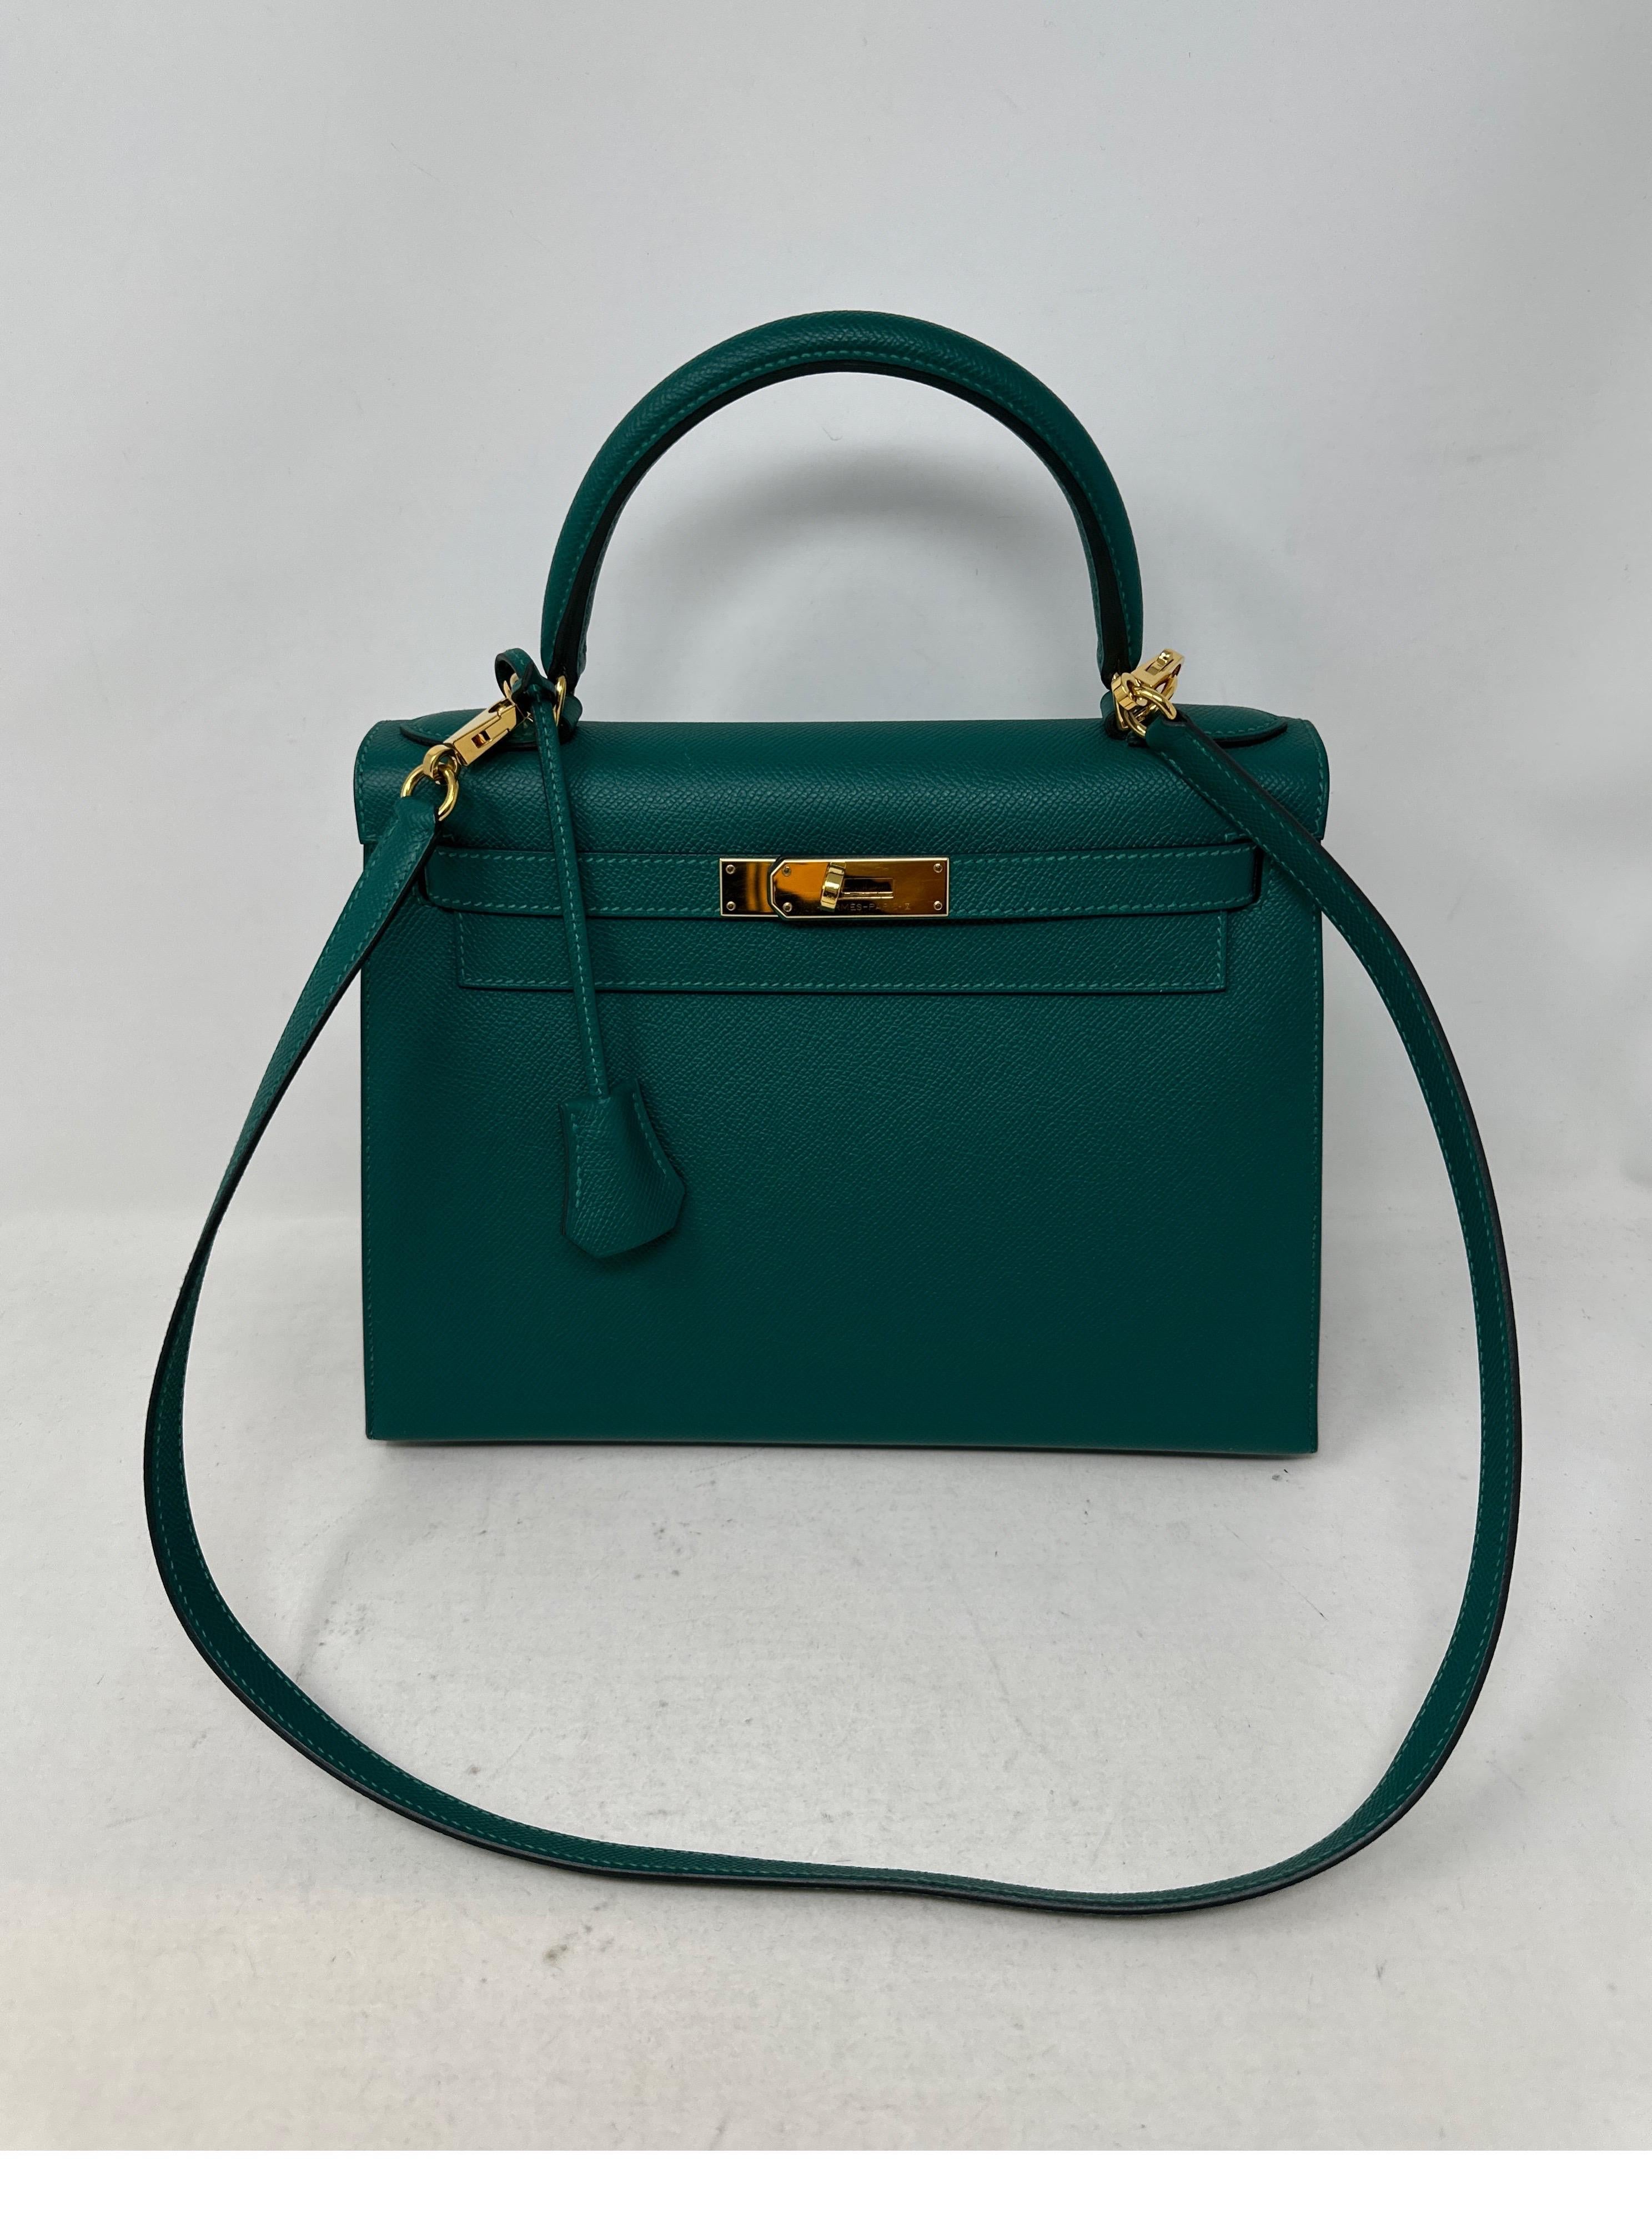 Hermes Malachite Kelly 28 Bag. Stunning teal green color in epsom leather sellier bag. Looks like new. Excellent condition. Gold hardware. Interior clean and mint. Includes clochette, lock, keys, and dust bag. Rare size and color. Guaranteed